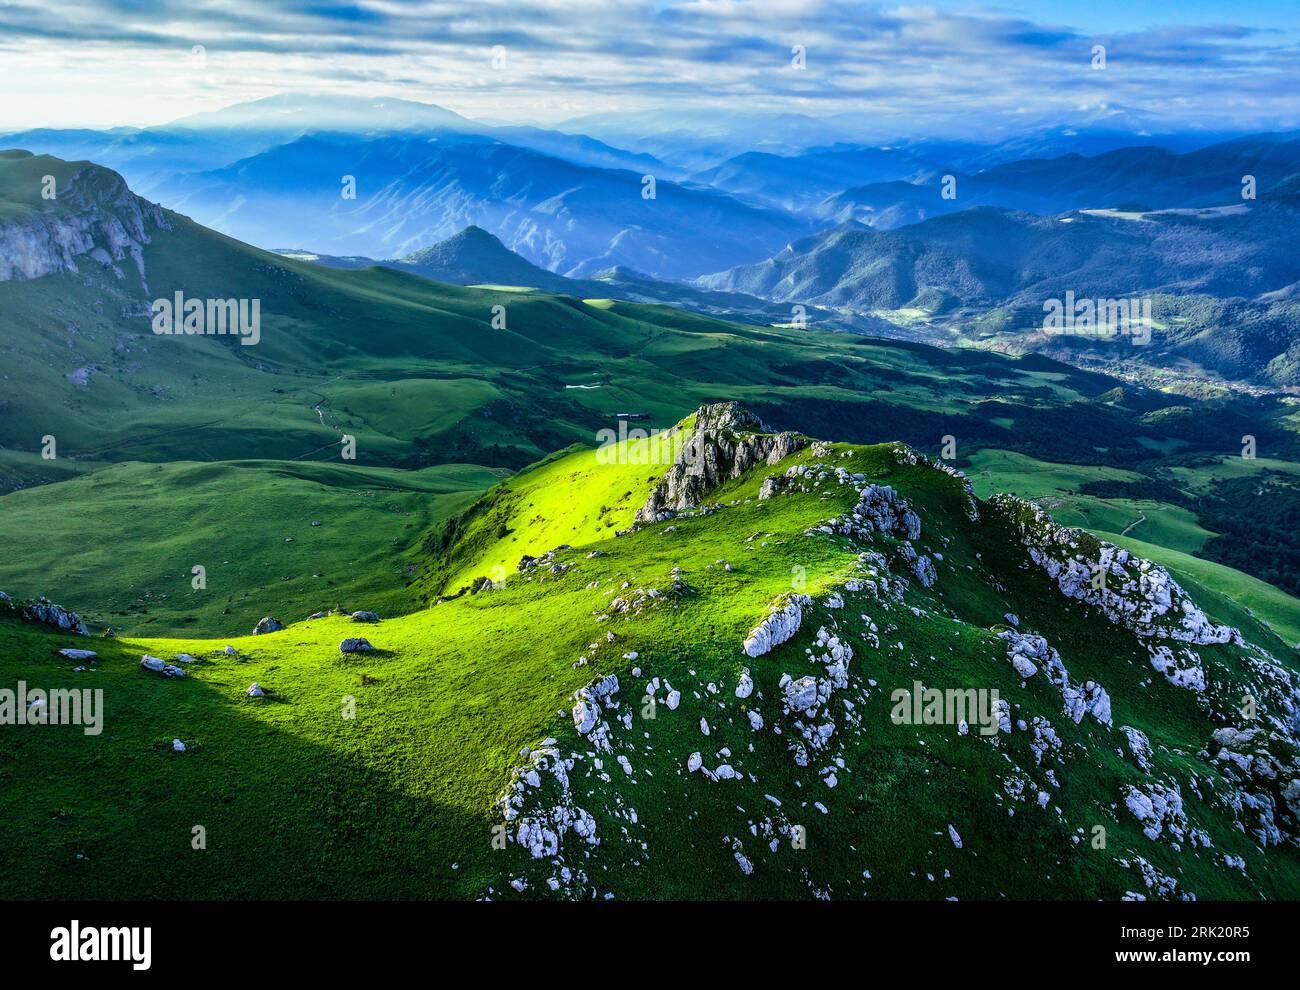 A stunning landscape of lush rolling hills in the mountains, Tavush province, Armenia Stock Photo